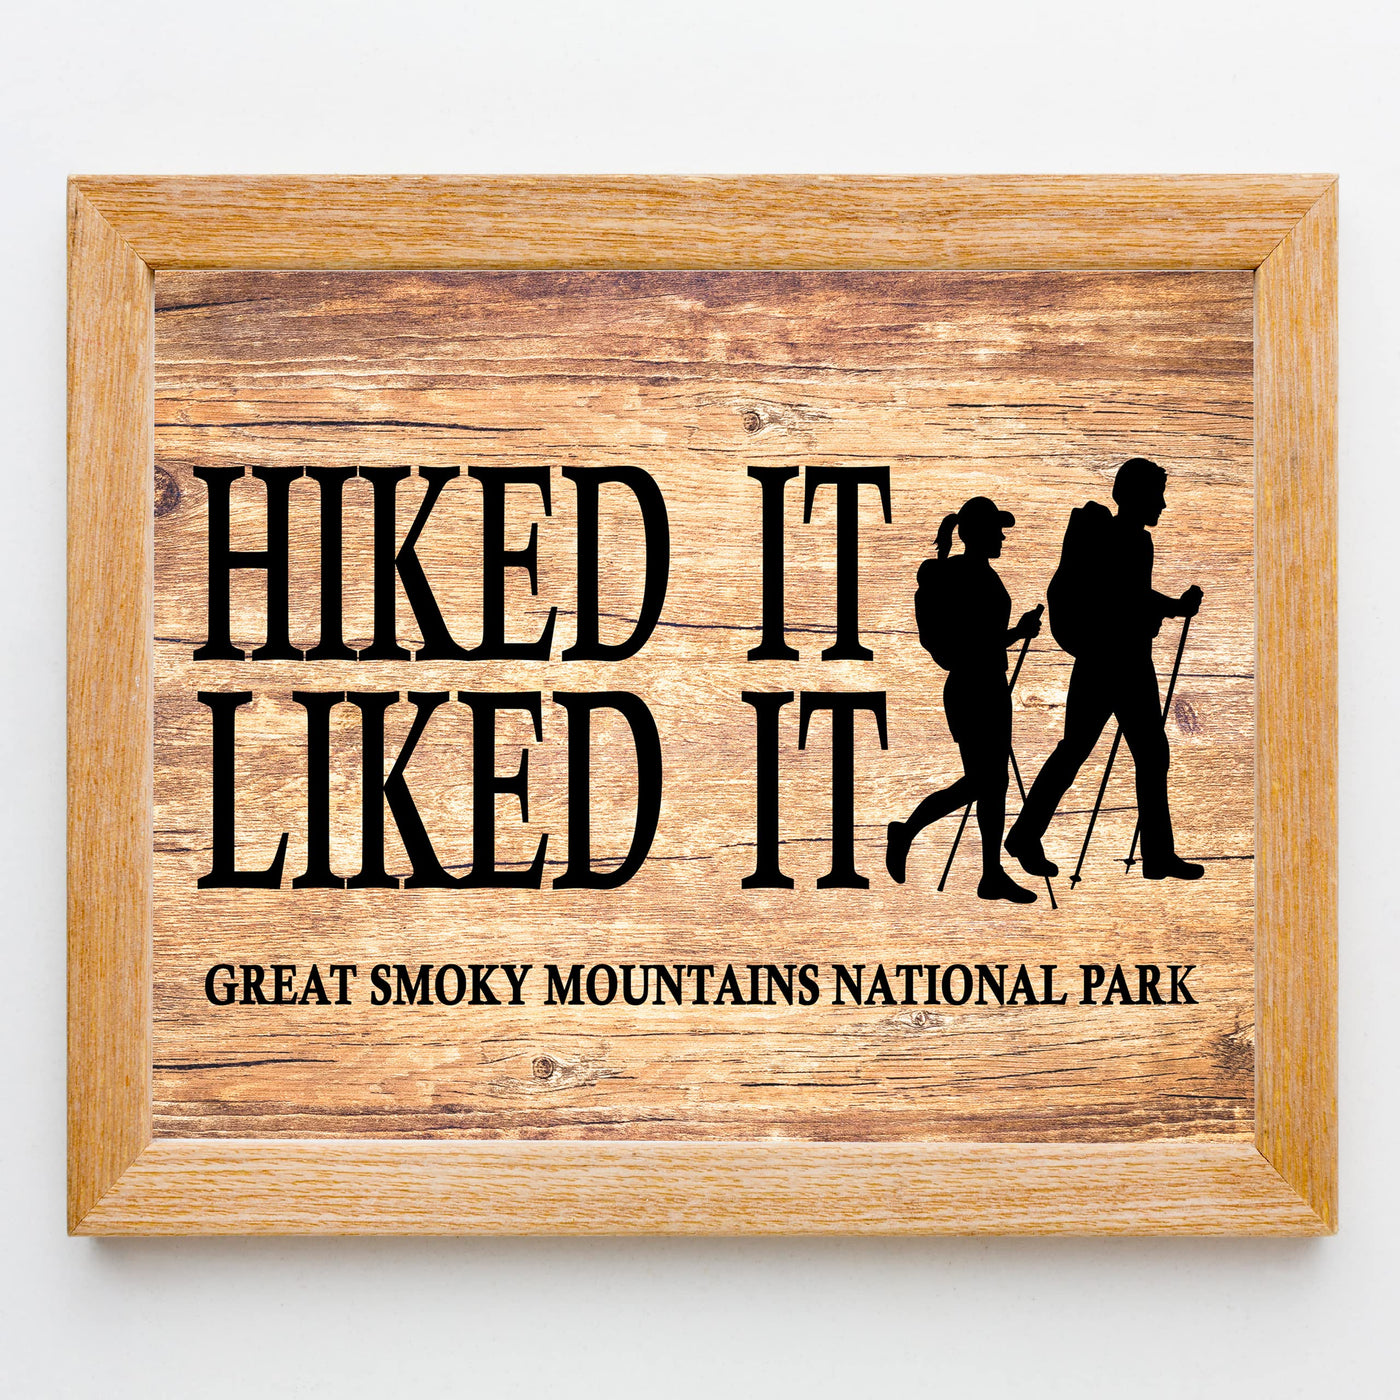 Great Smoky Mountains National Park-Hiked It, Liked It-Rustic Wall Decor - 10x8" Funny Outdoors Print -Ready to Frame. Replica Wood Design for Home-Office-Cabin-Lodge-Lake. Printed on Photo Paper.